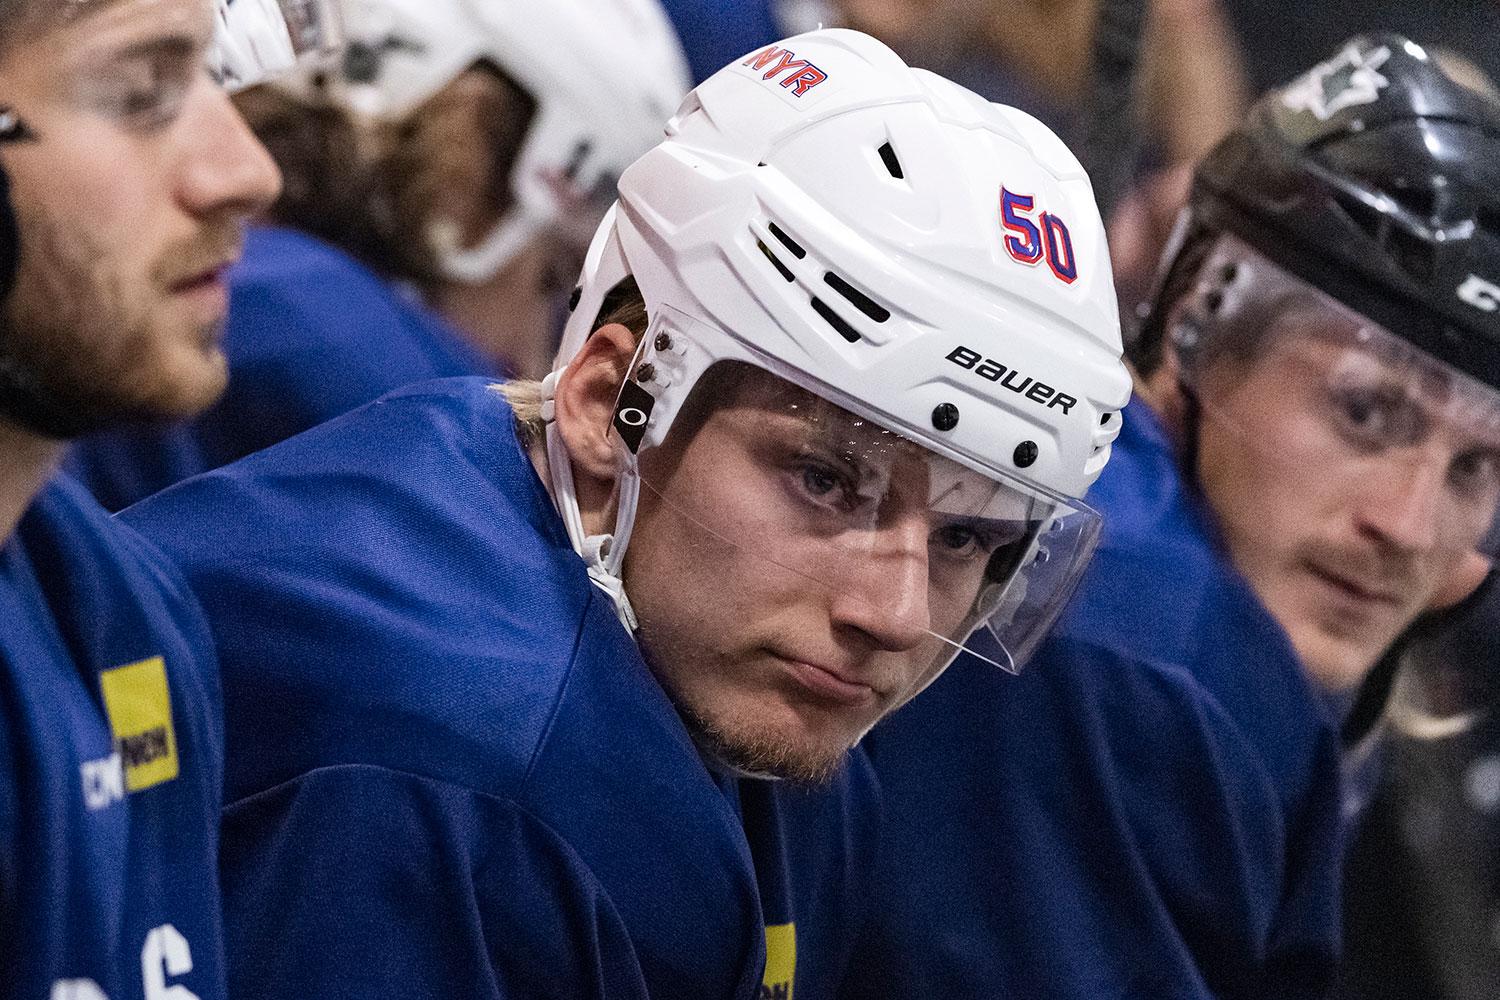 Lias Andersson.